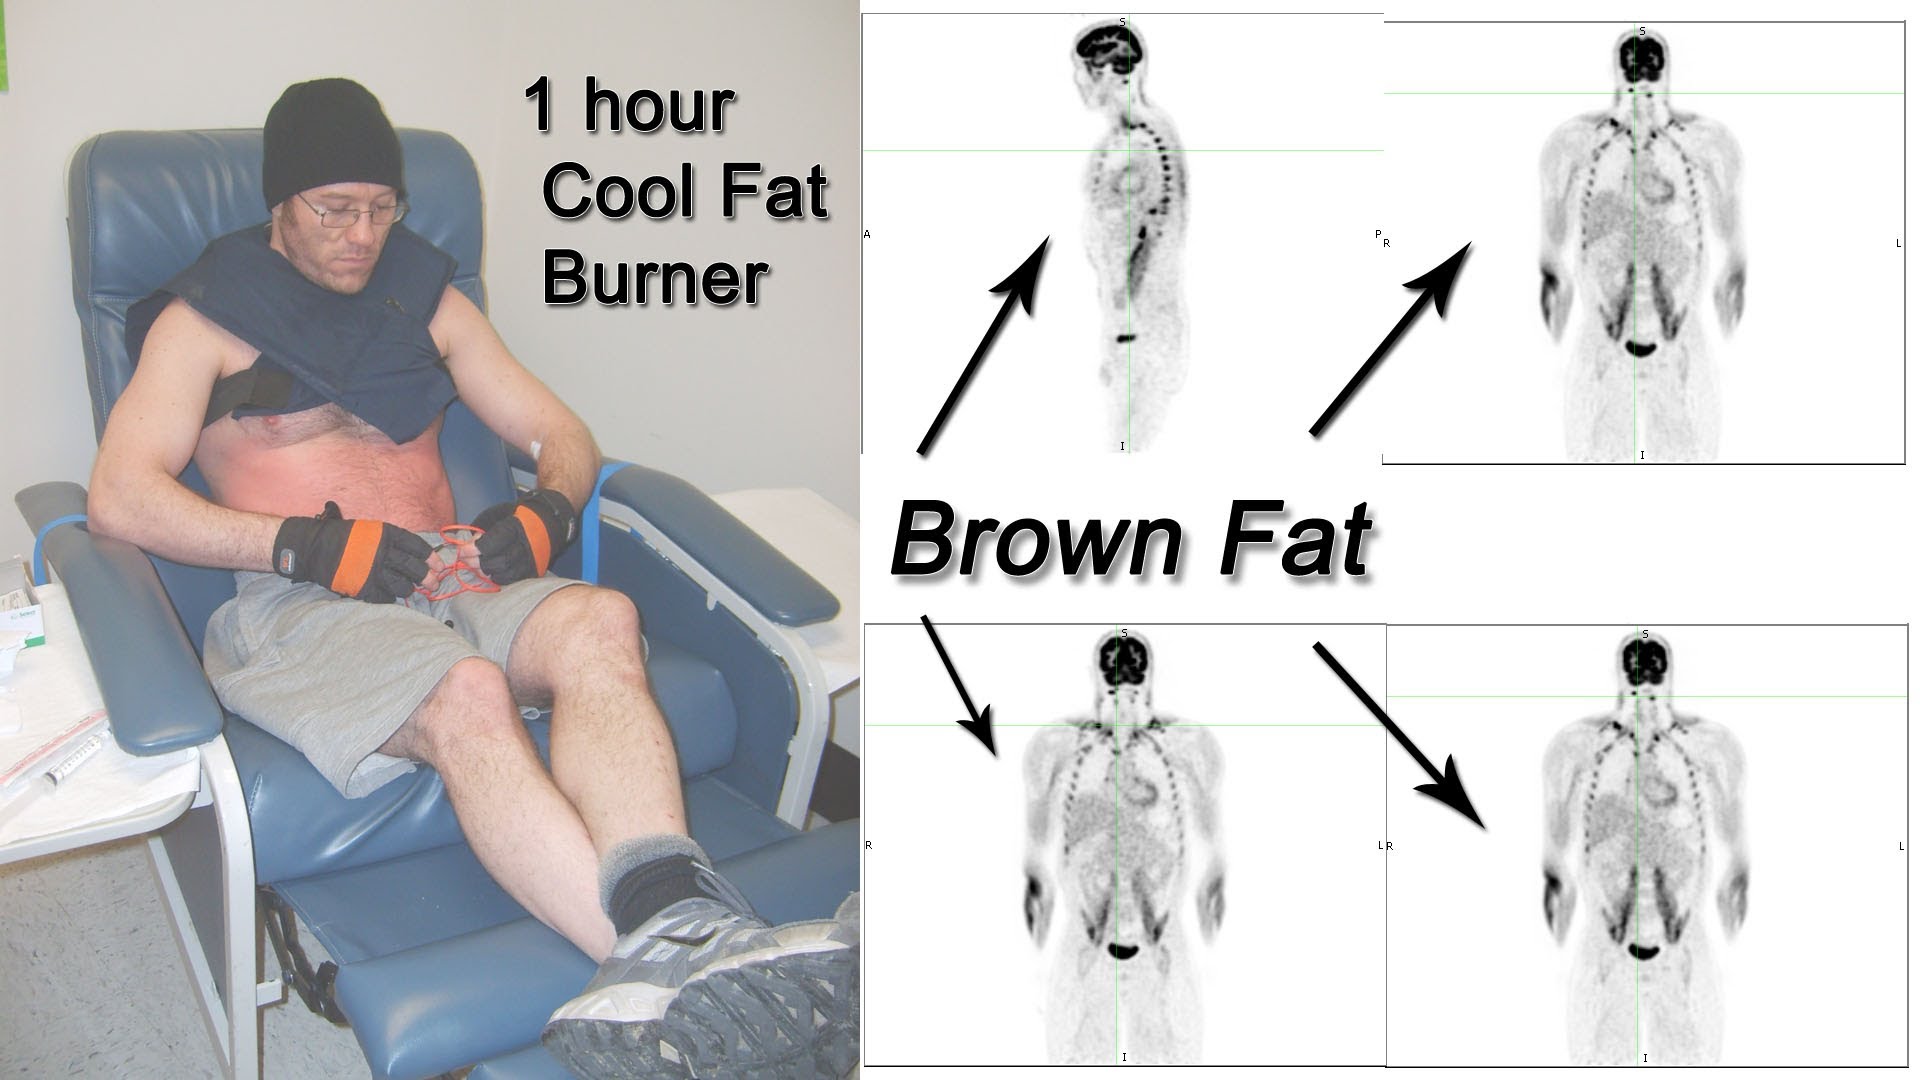 The Cool Fat Burner activates brown fat!